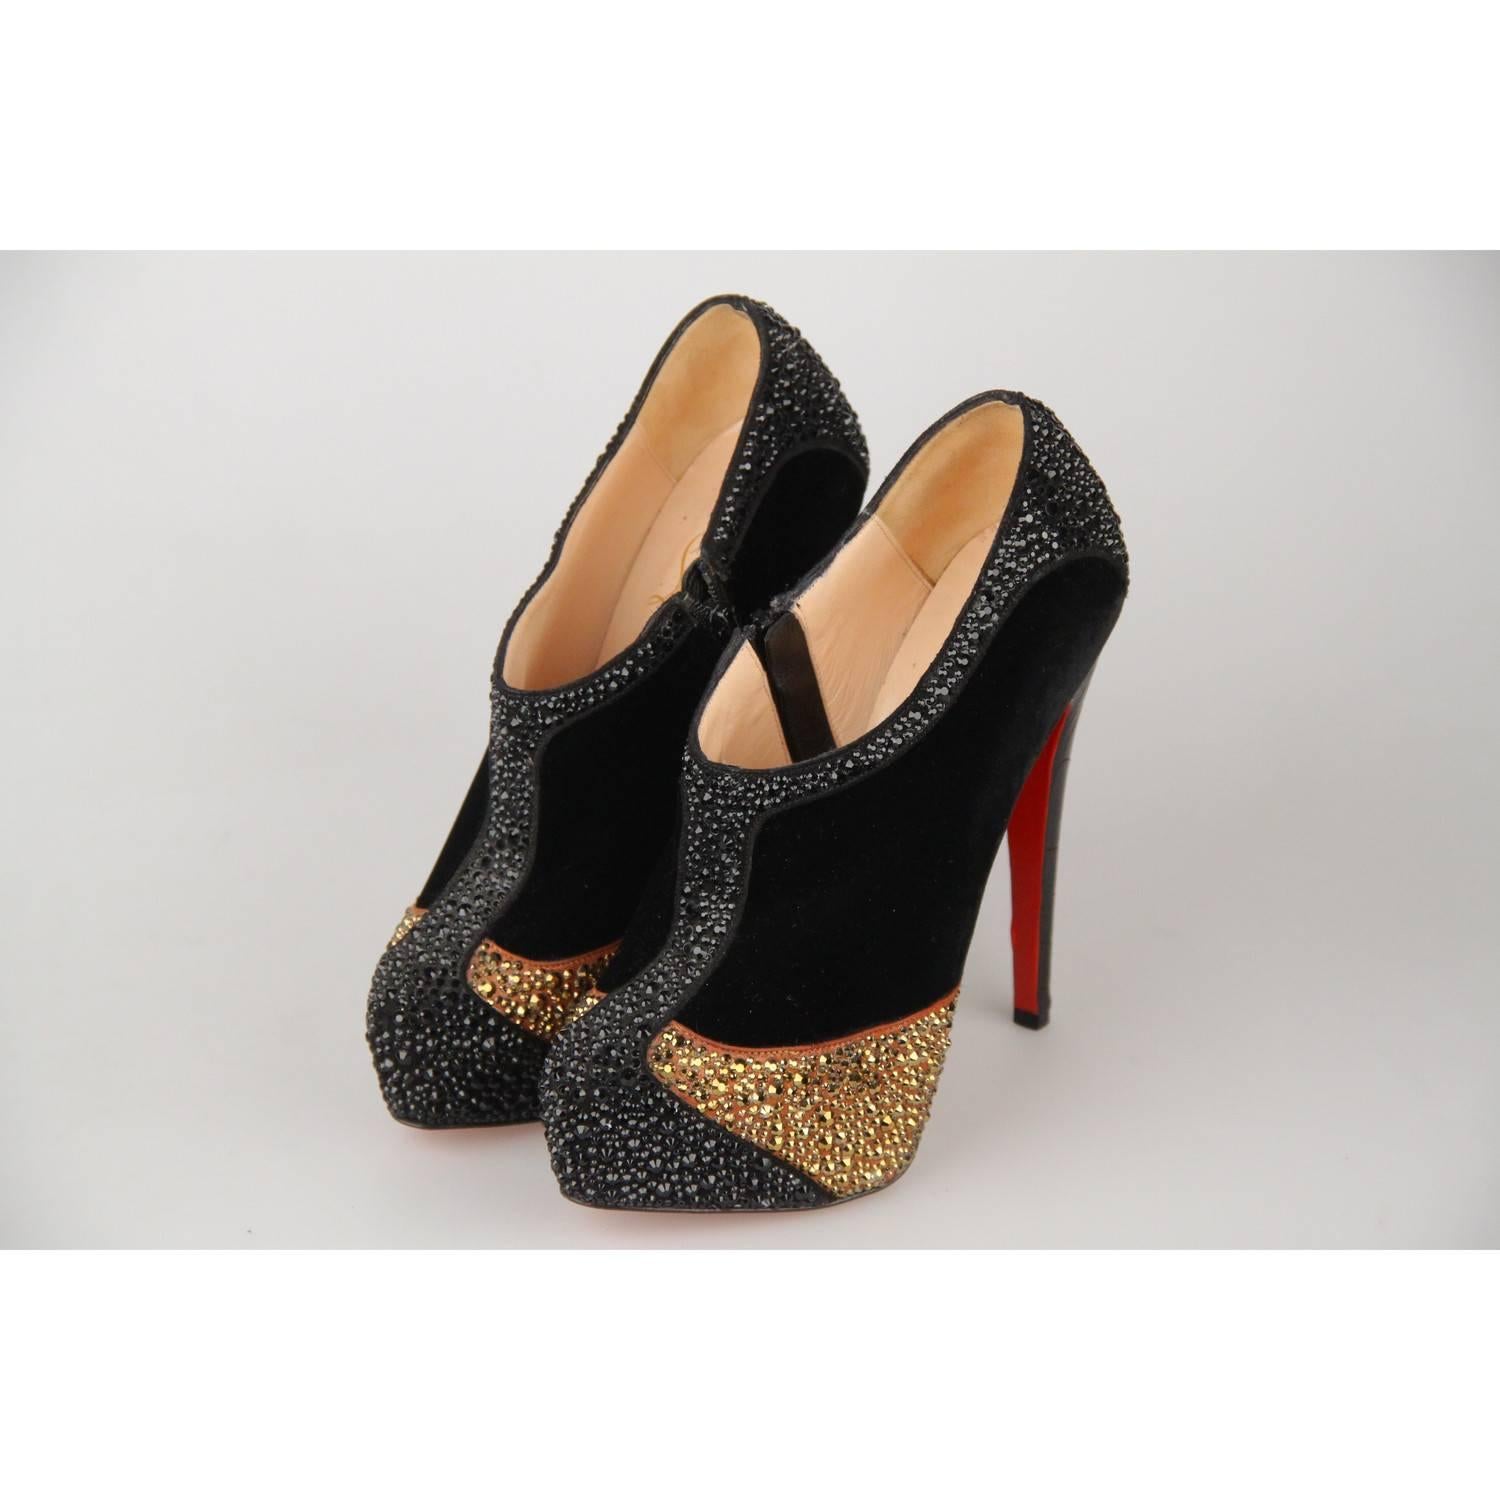 - Christian Louboutin platform ankle boots
- Model: 'Laelia Strass 140' 
- TBlack velvet embellished with black and gold-tone Swarovski crystals
- Embossed Crocodile look leather covered heels
- Zip closures on the sides
- 5.5 inches - 14 cm covered